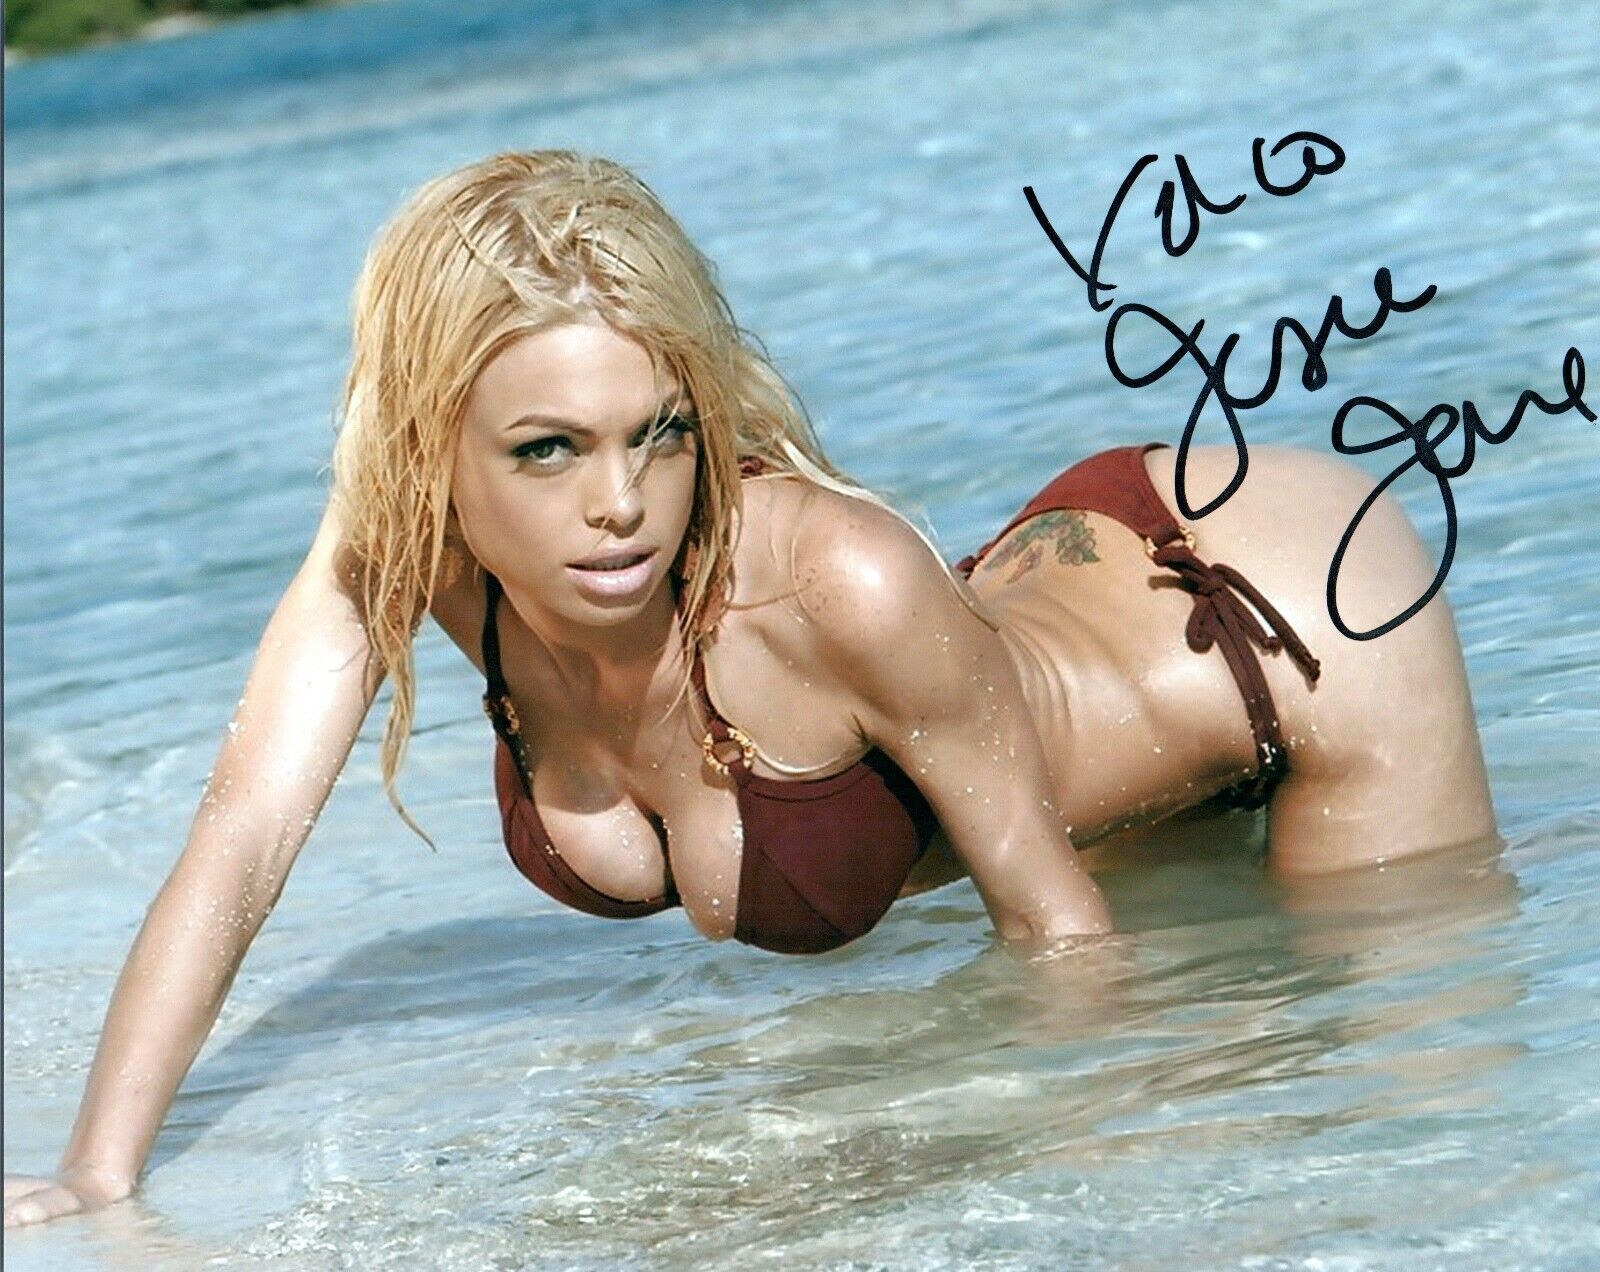 Jesse Jane Super Sexy Hot Adult Model Signed 8x10 Photo Poster painting COA Proof 17